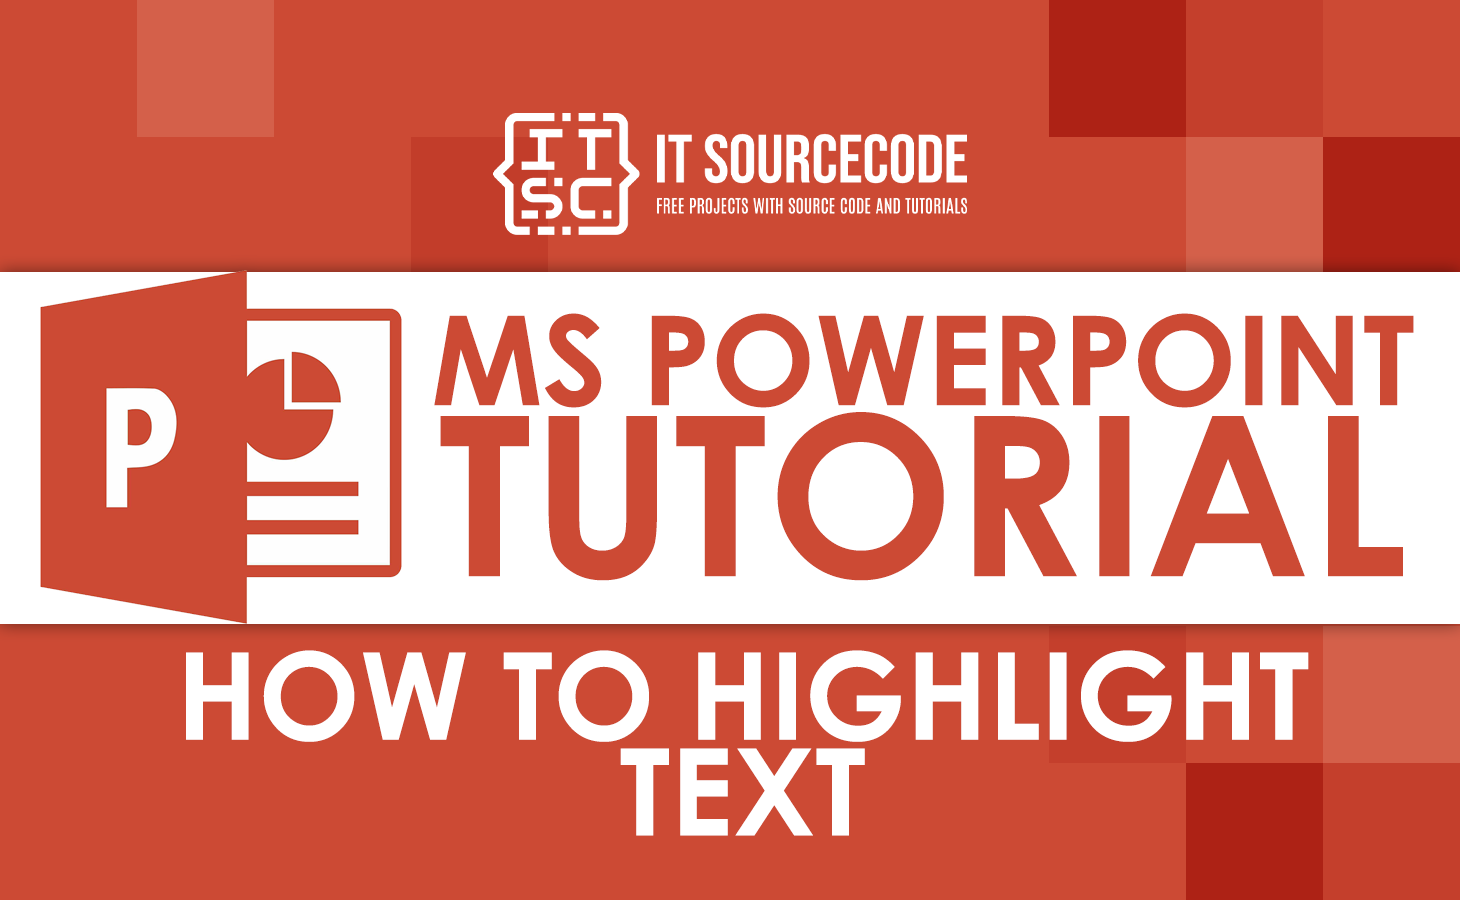 MS Powerpoint Tutorial how to highlight text